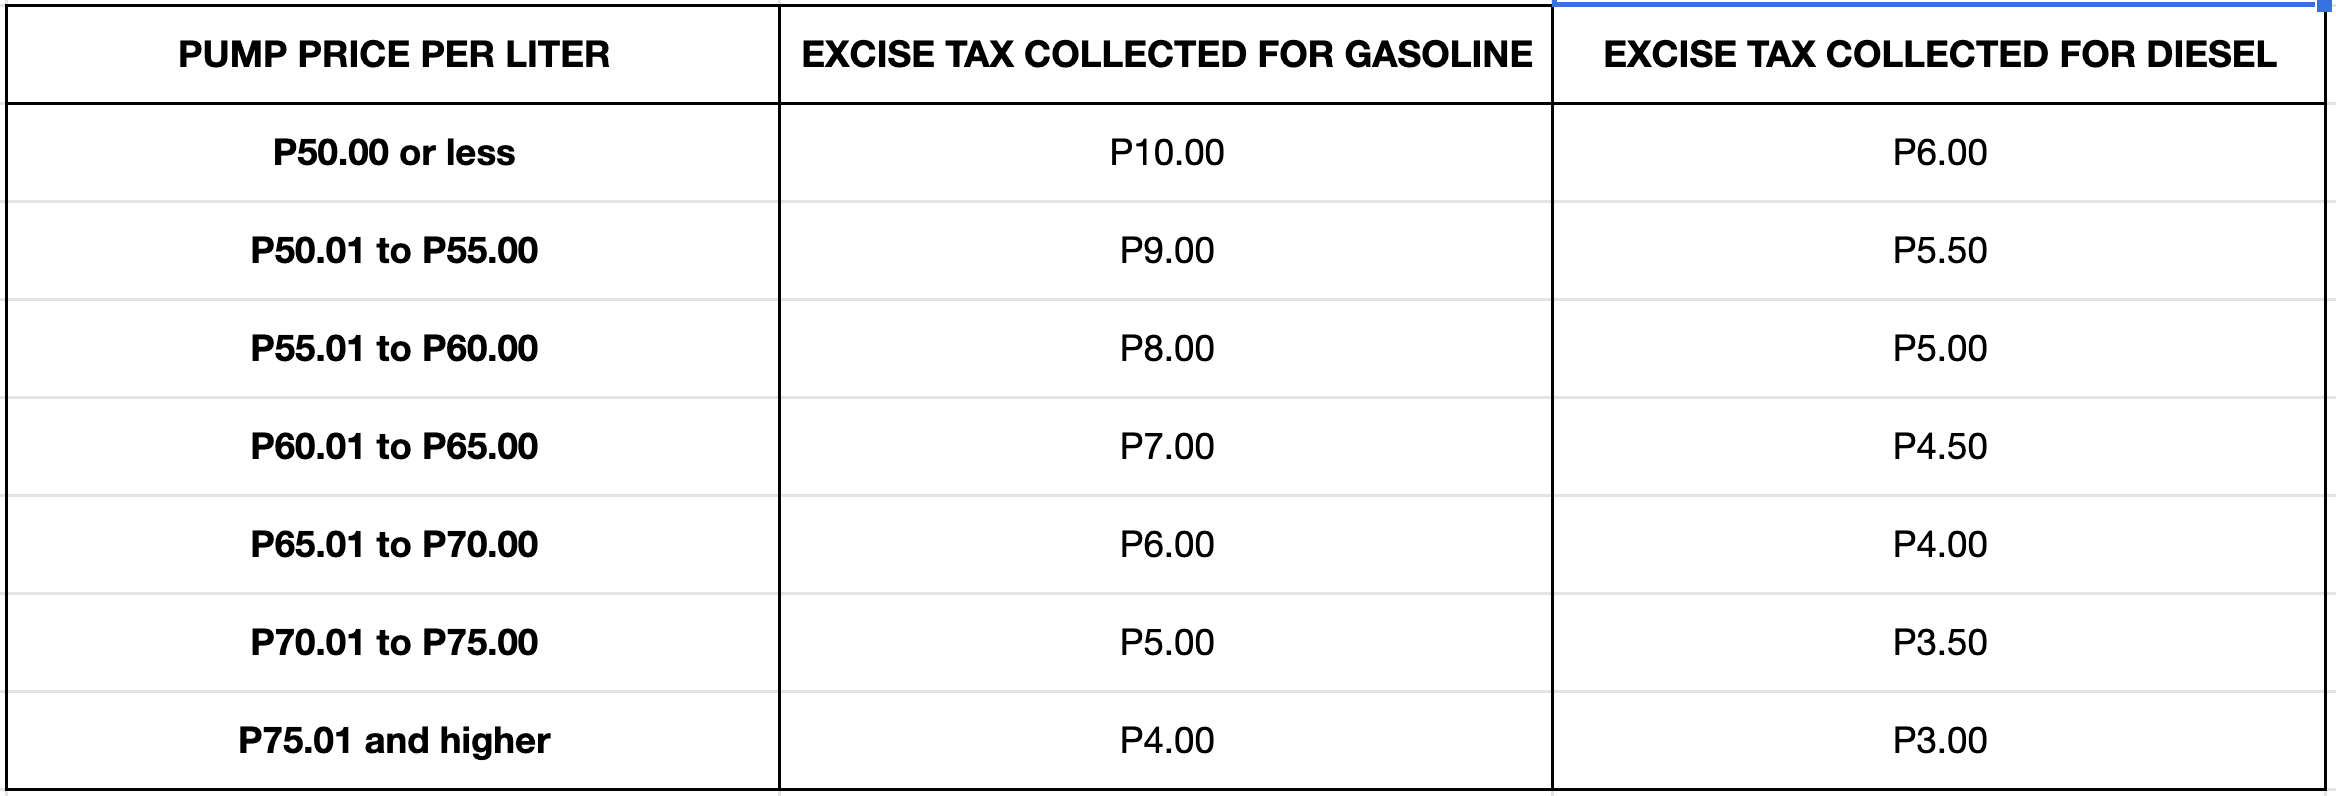 table showing lowered fuel excise taxes on higher fuel prices